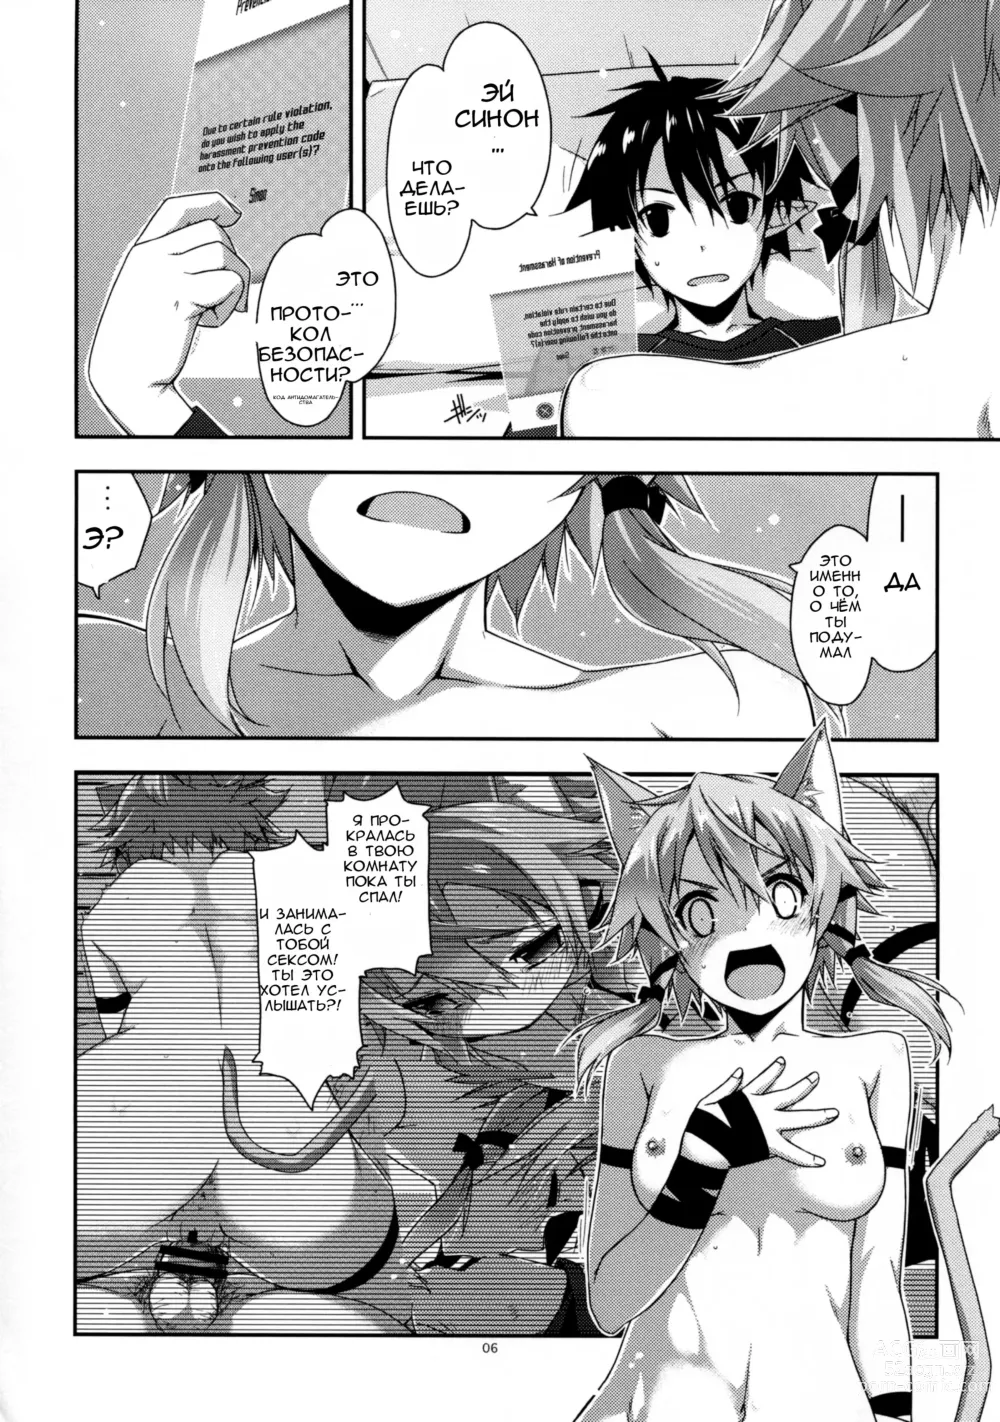 Page 6 of doujinshi Case closed.